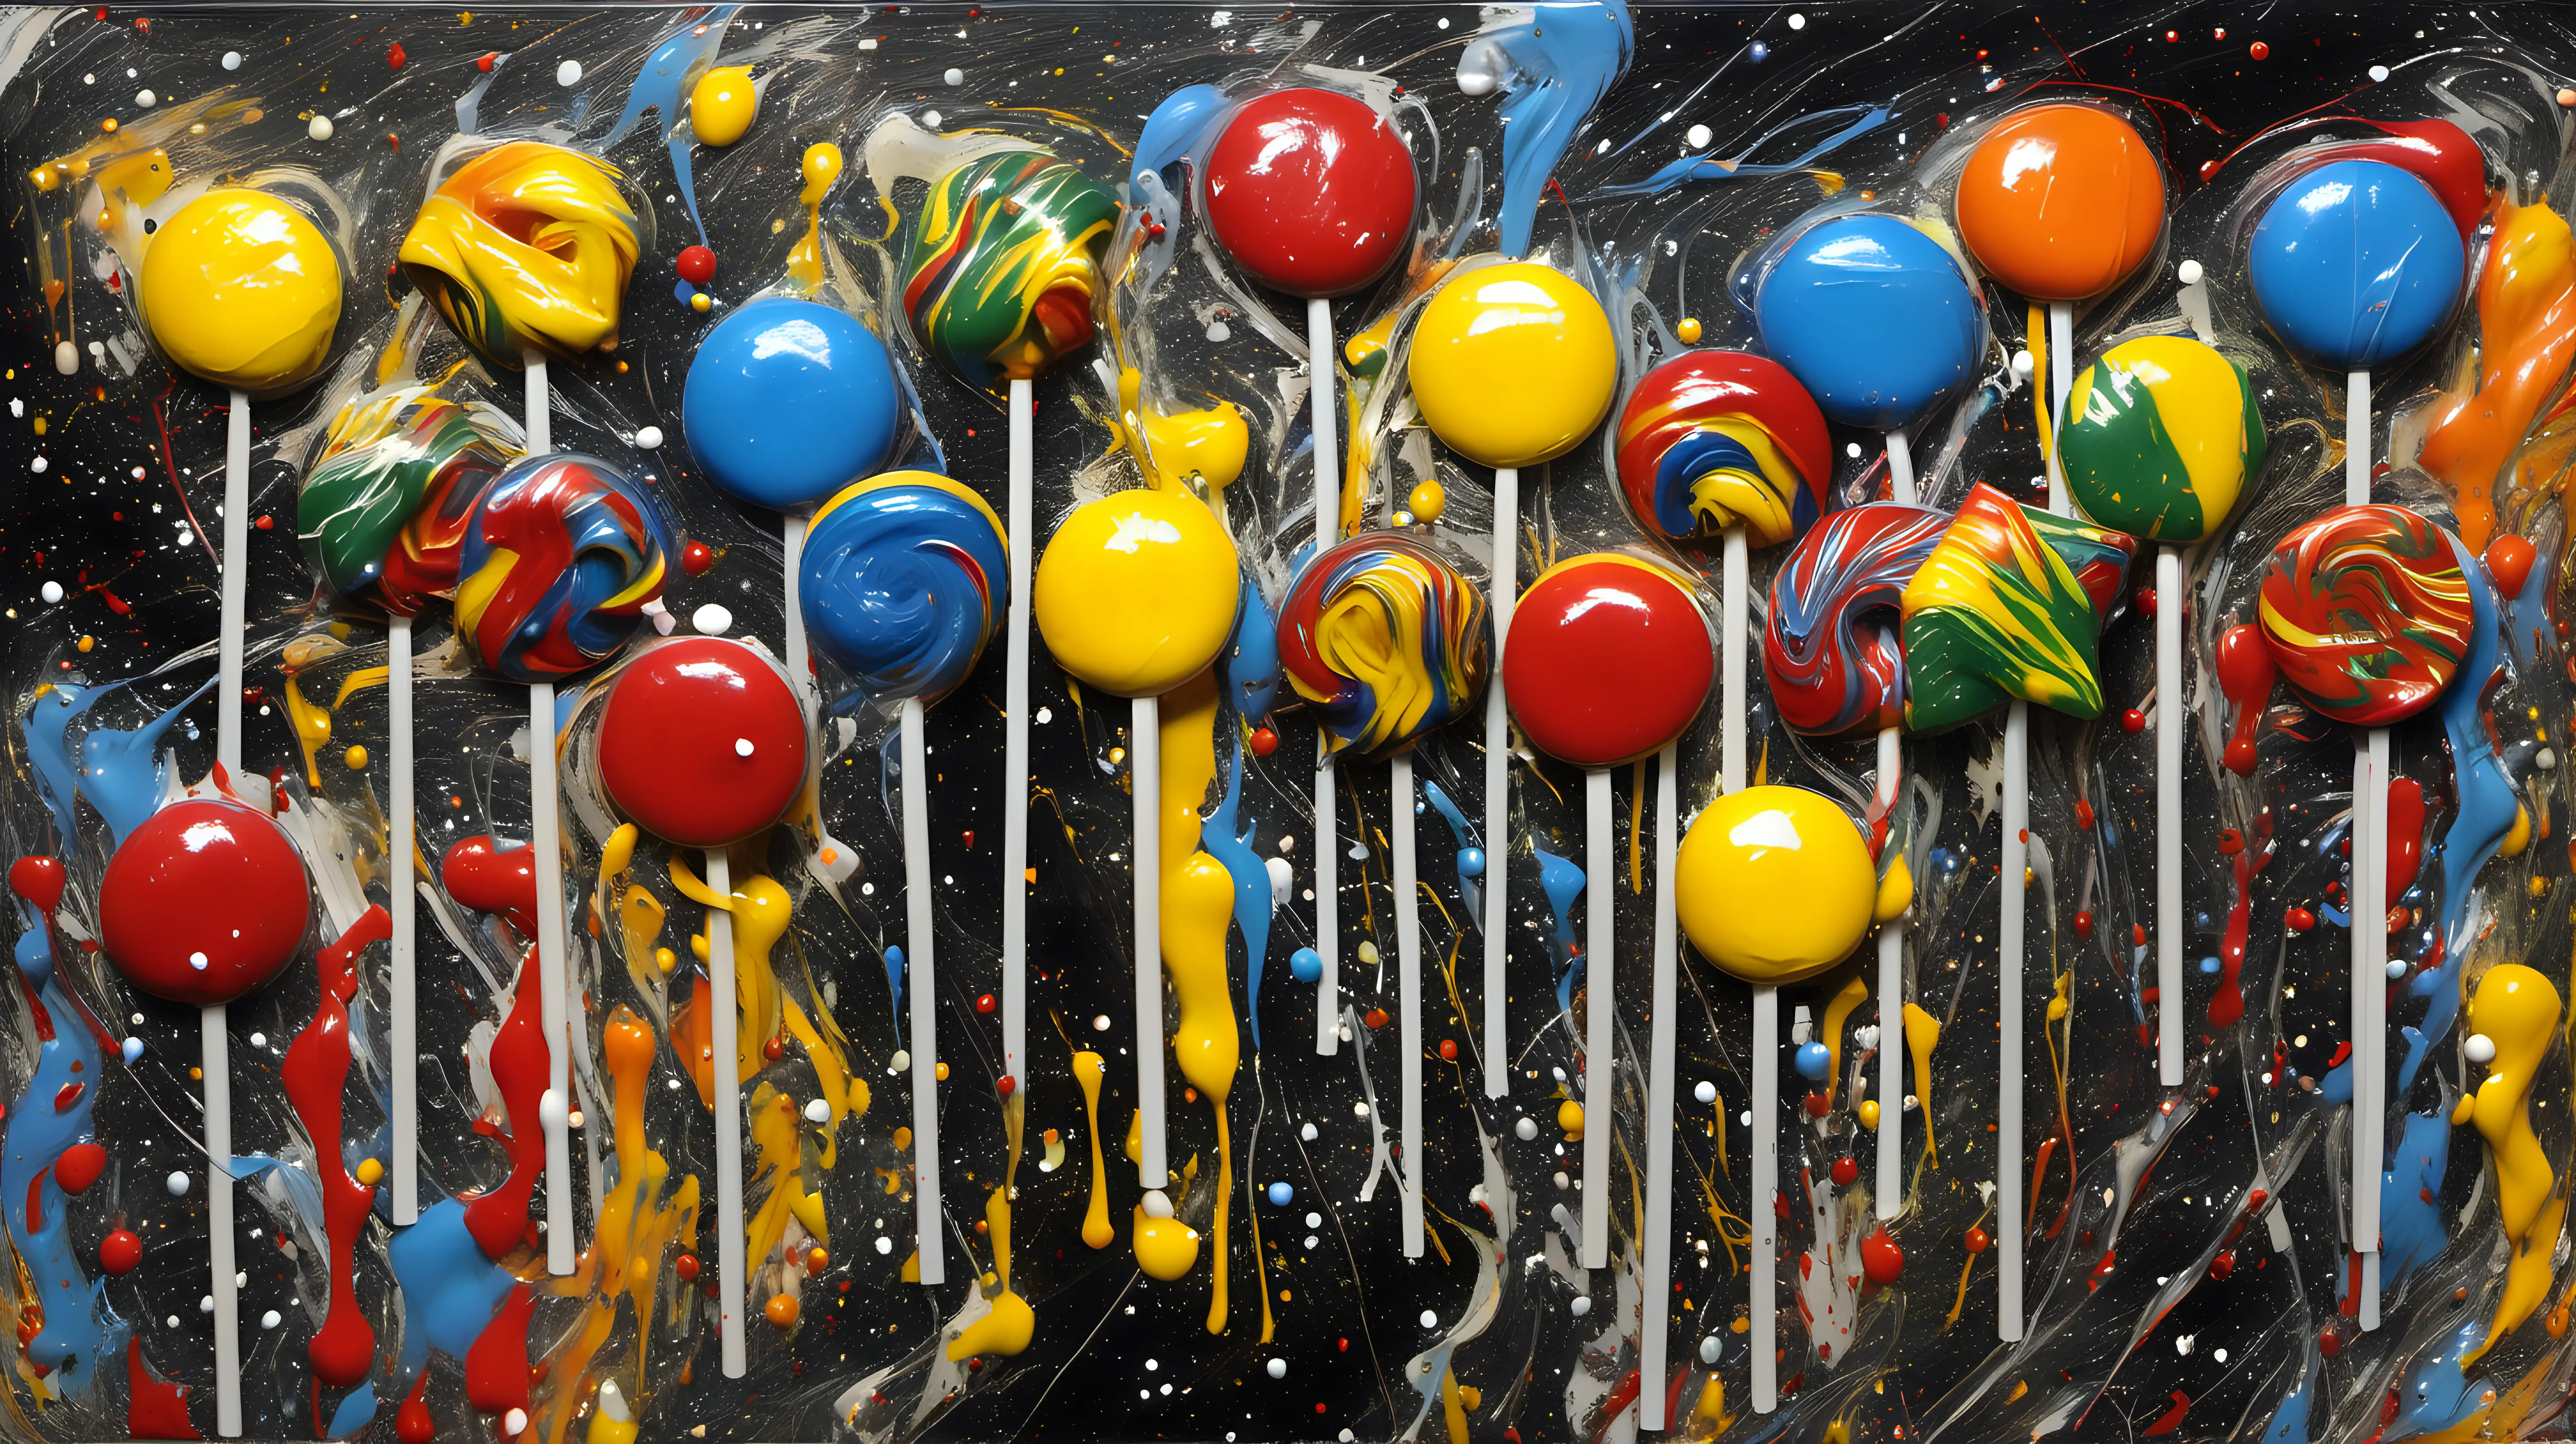 Create a (painting) in an (Jackson Pollock style) of (multiple) lollipops
